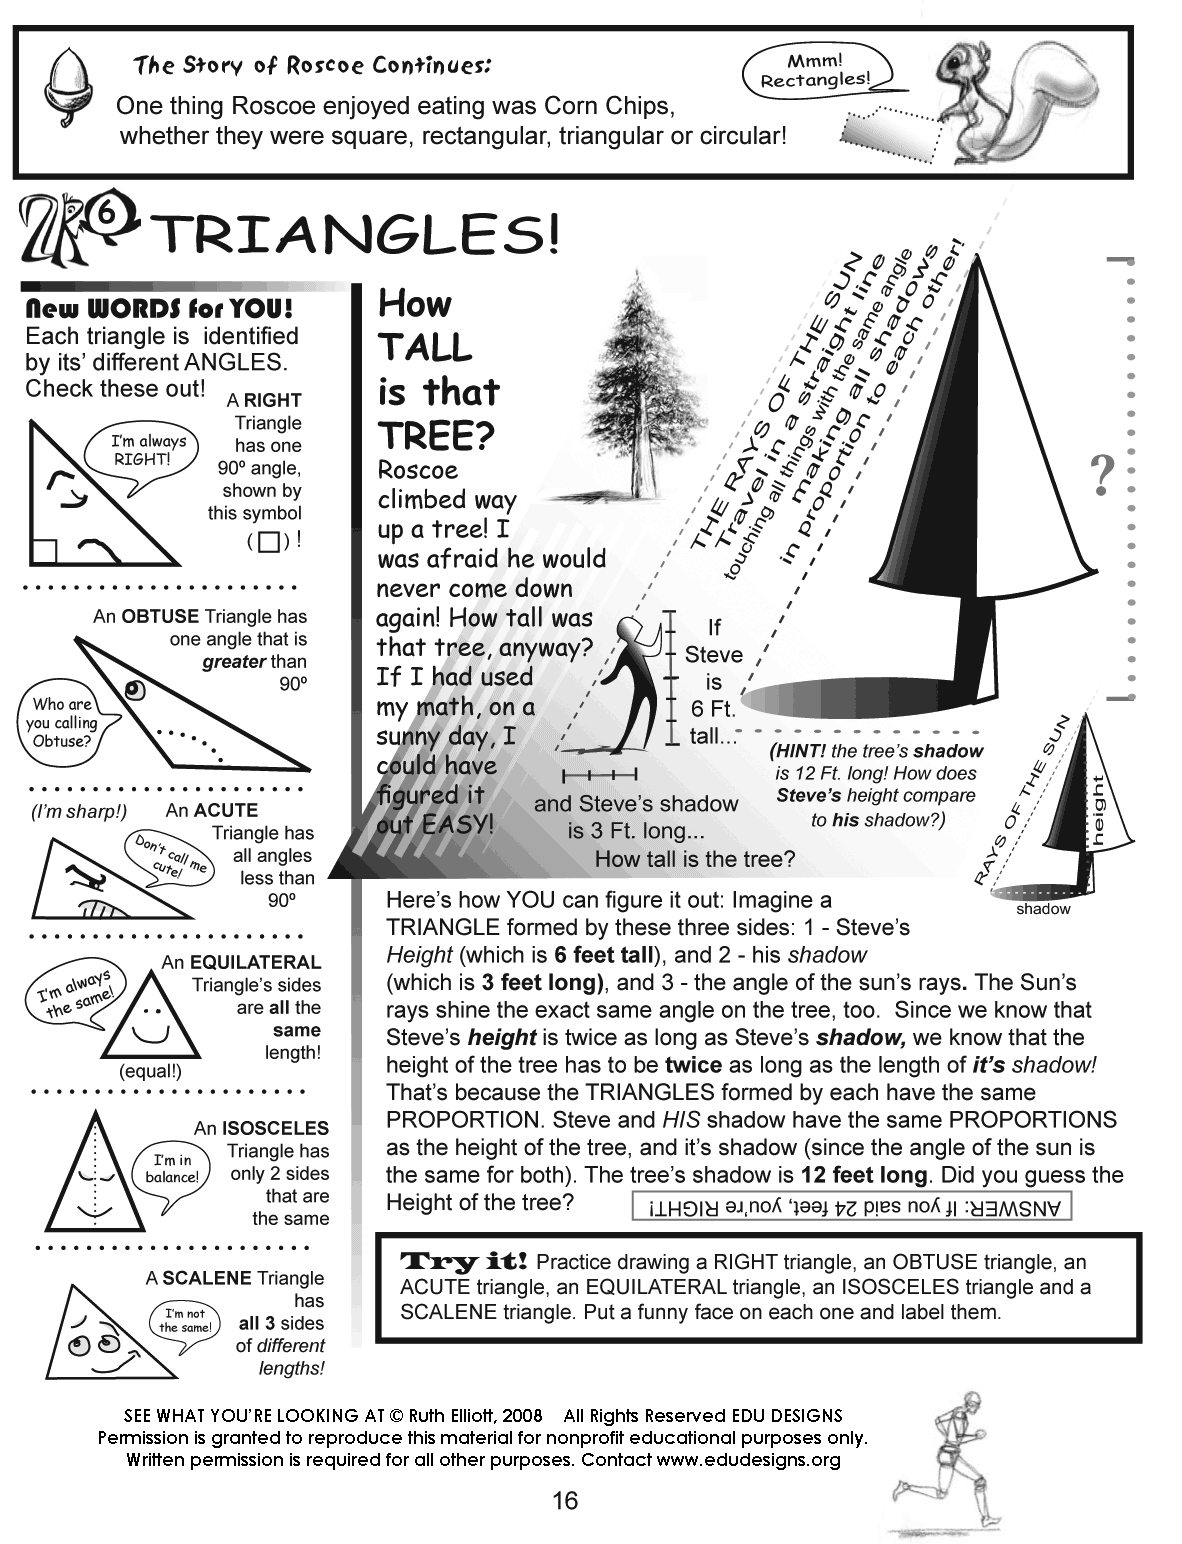 Triangles tell height of tree